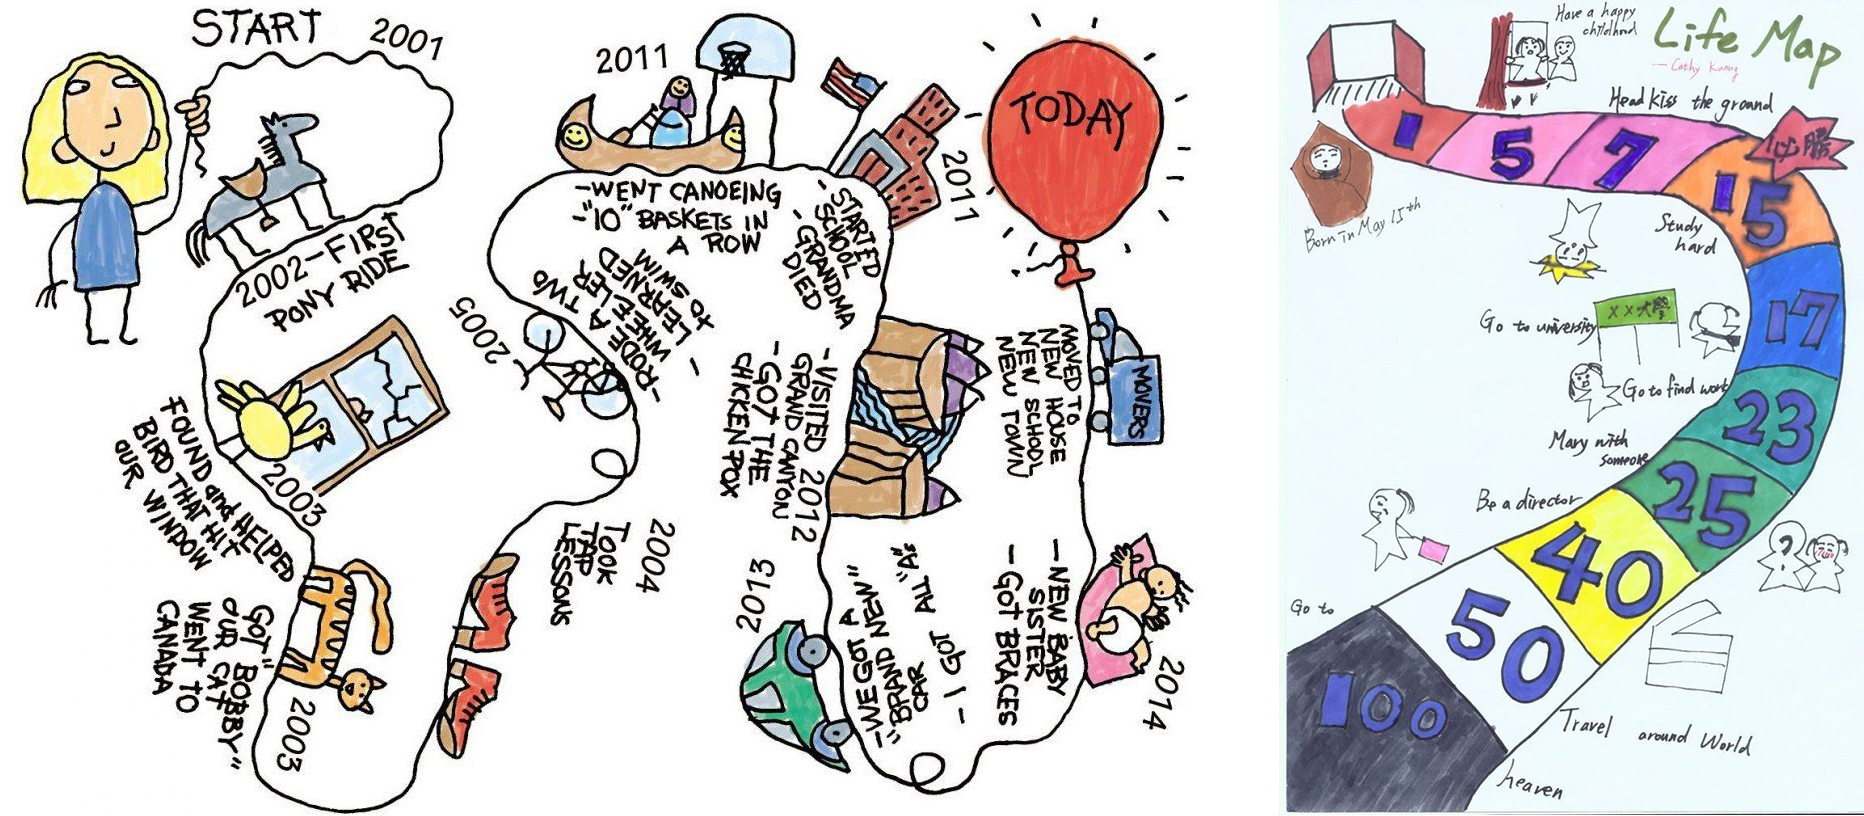 Montage of cartoon-like images depicting the life journey of young people